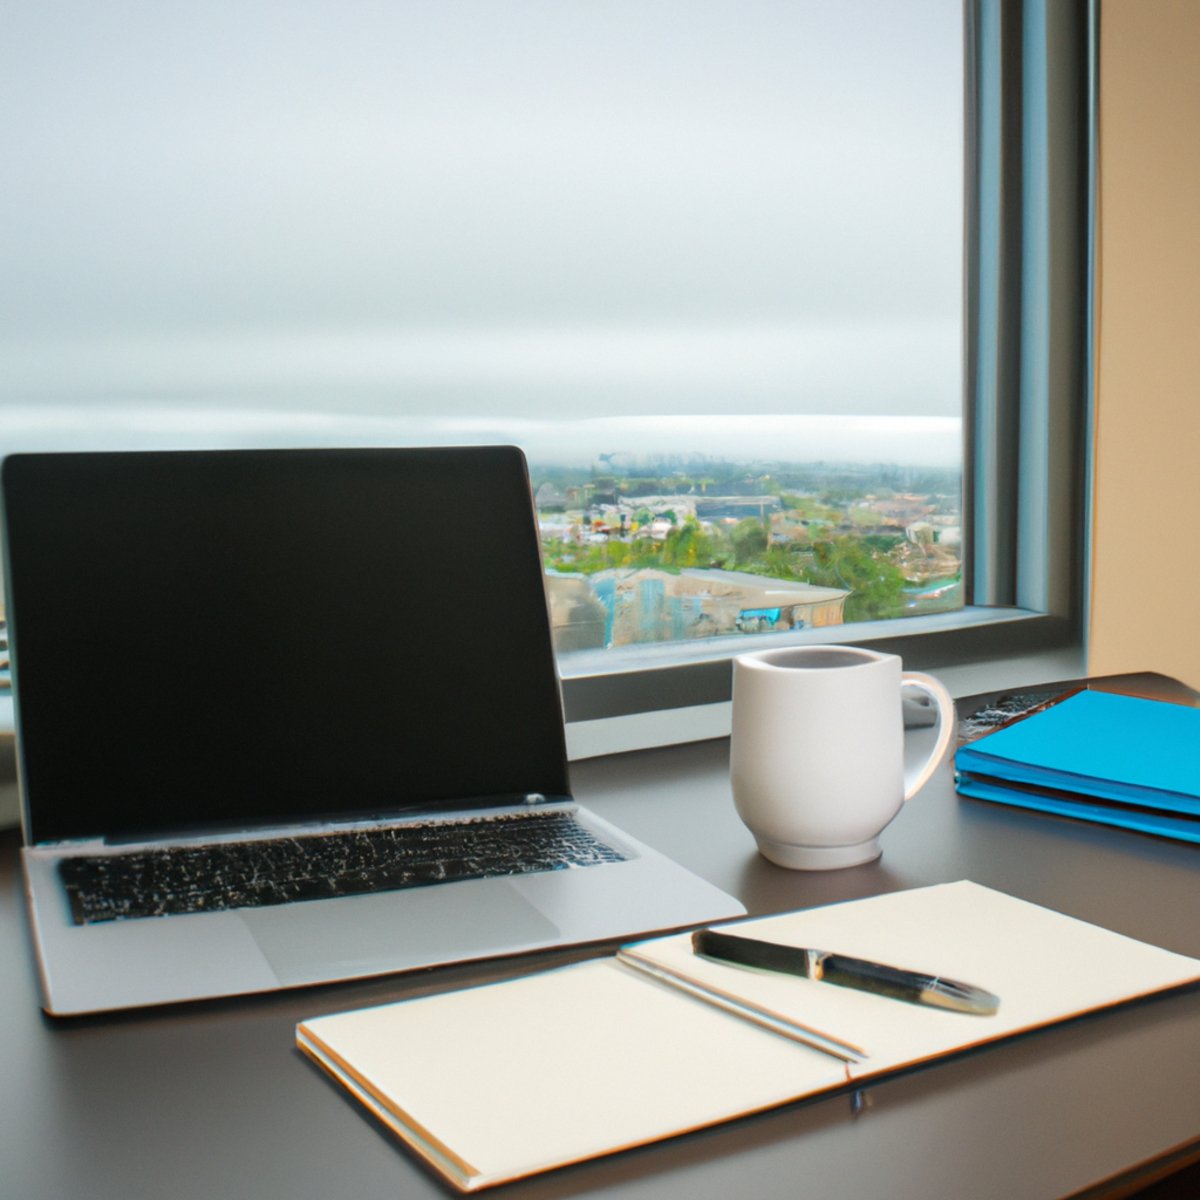 Stress management tips for busy professionals - Organized desk with laptop, notebook, pen, and coffee. City skyline view. Busy professional's life with a sense of calm and balance.